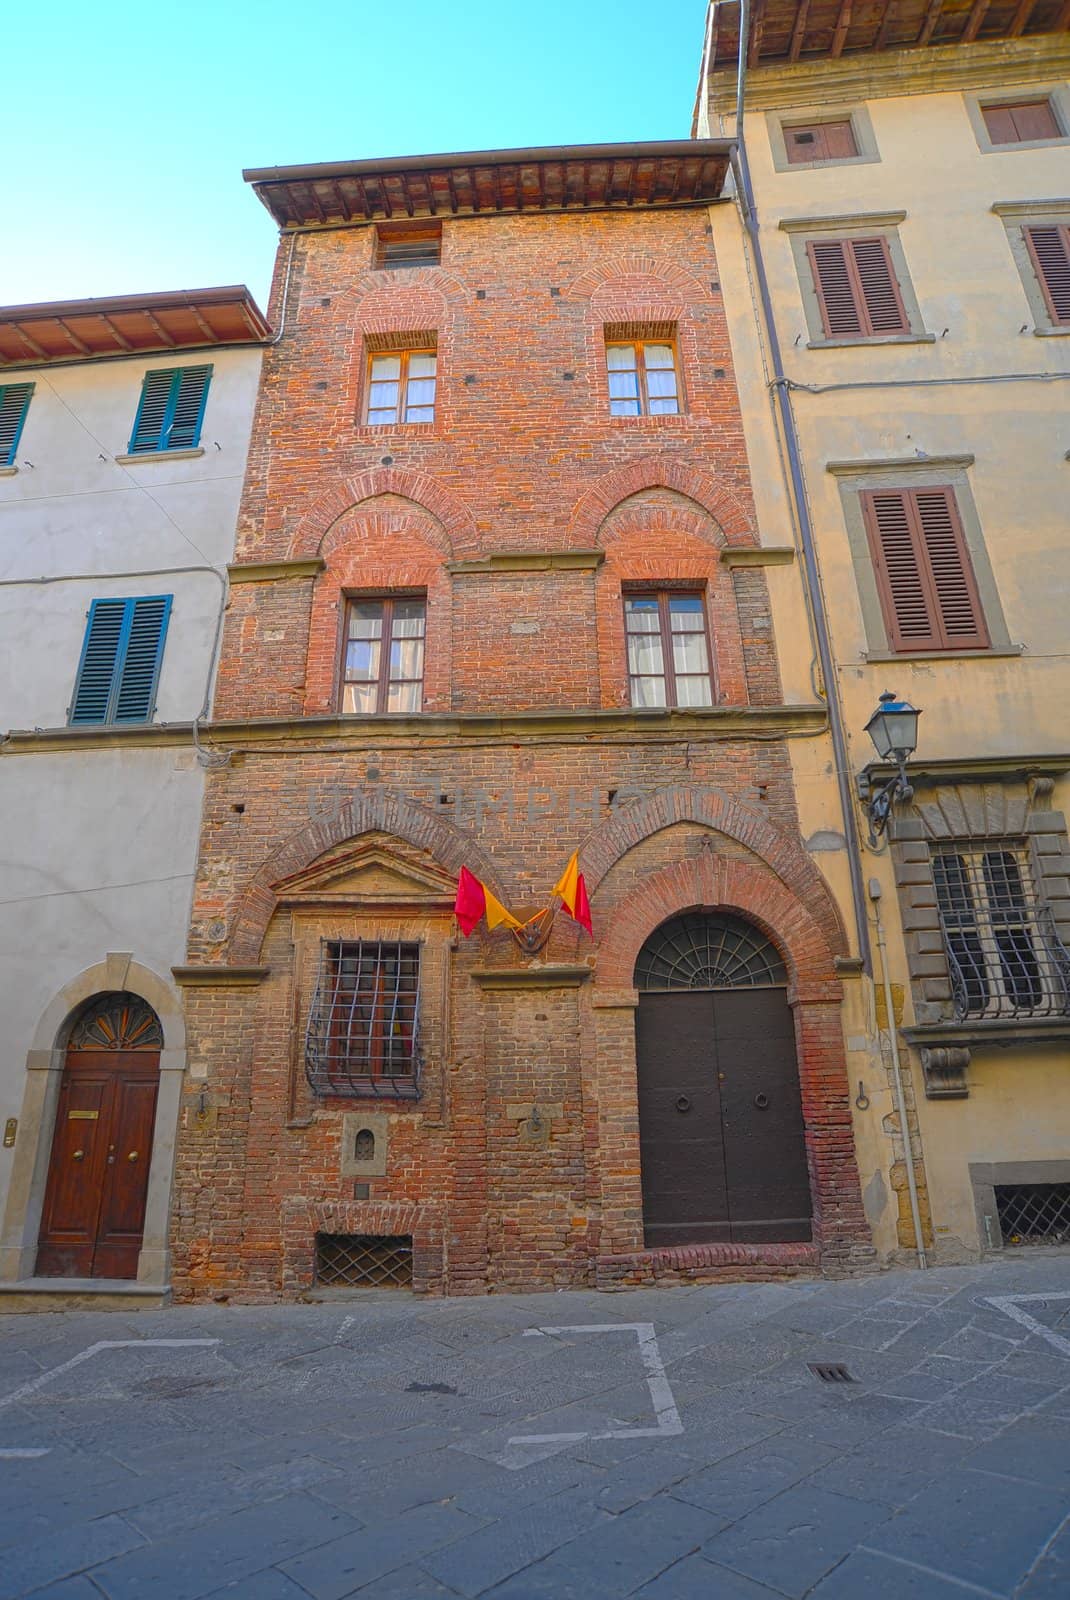  Typical Medieval Architecture In The Small Tuscan Town, Italy